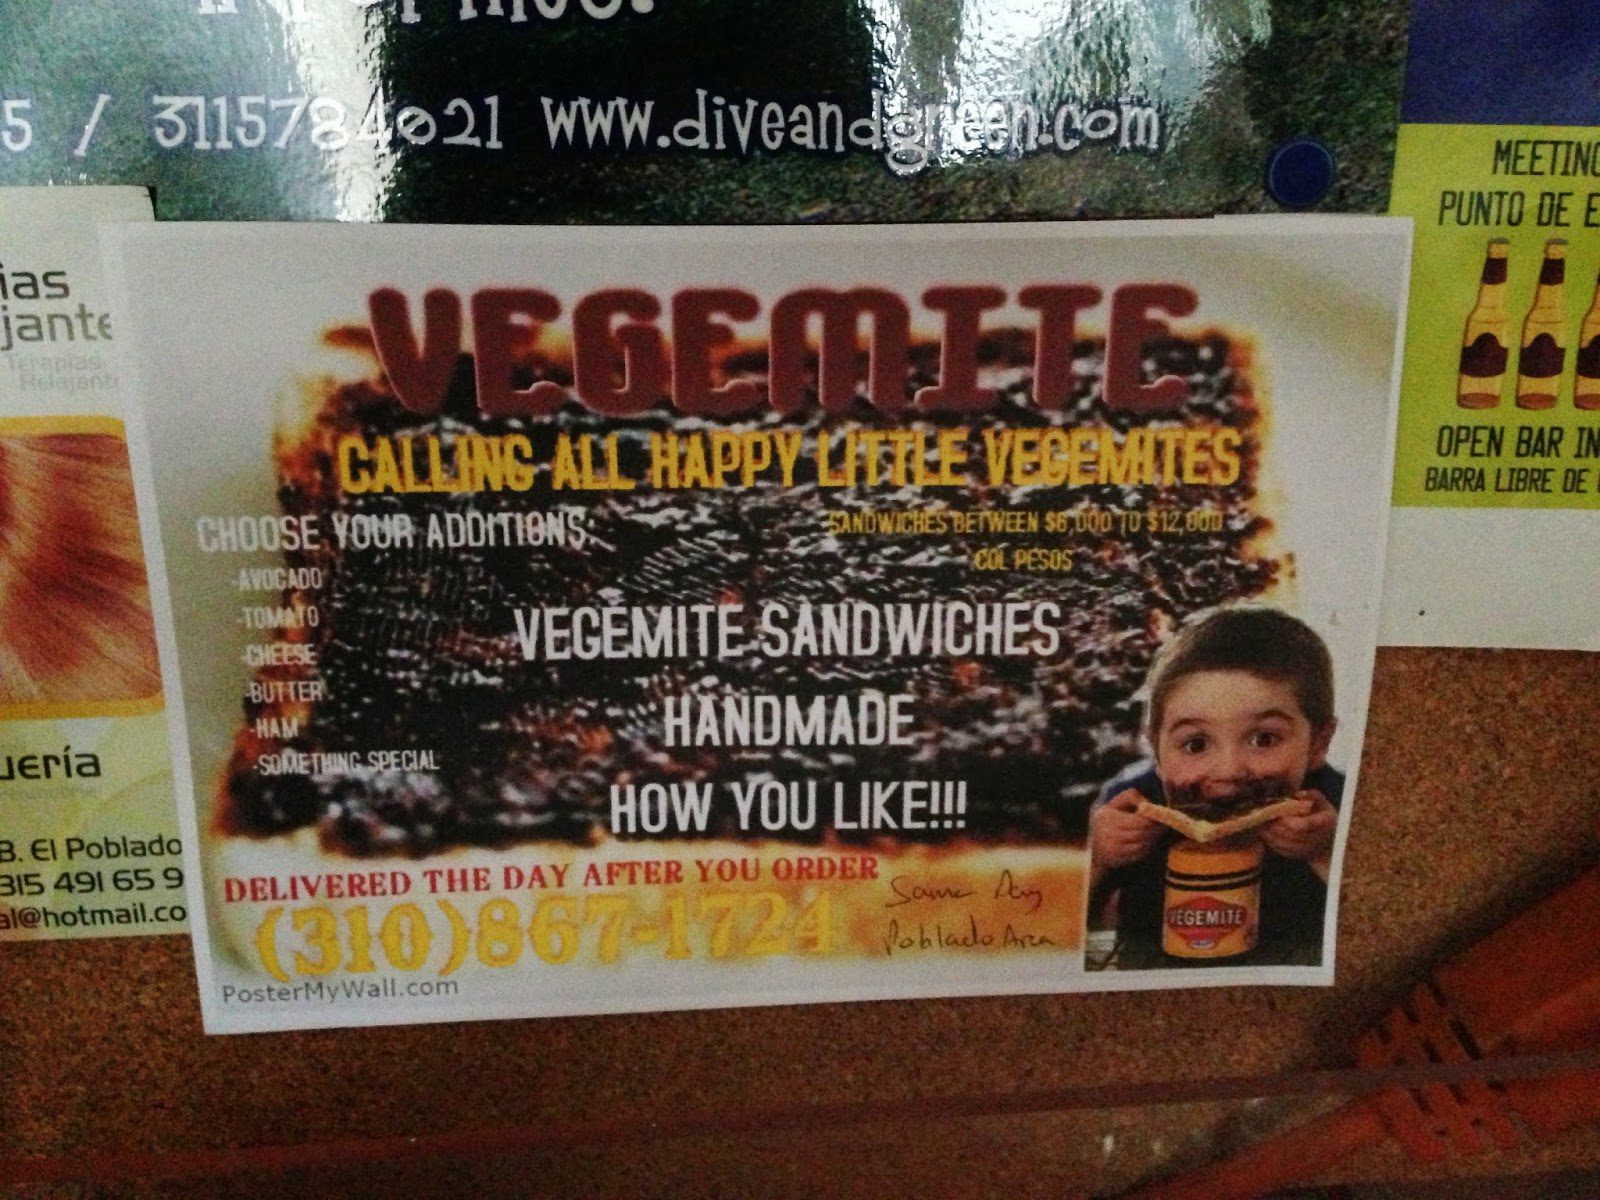 For all you Aussies out there, you can get Vegemite sandwiches delivered to this hostel. Isn't that reason enough to stay?